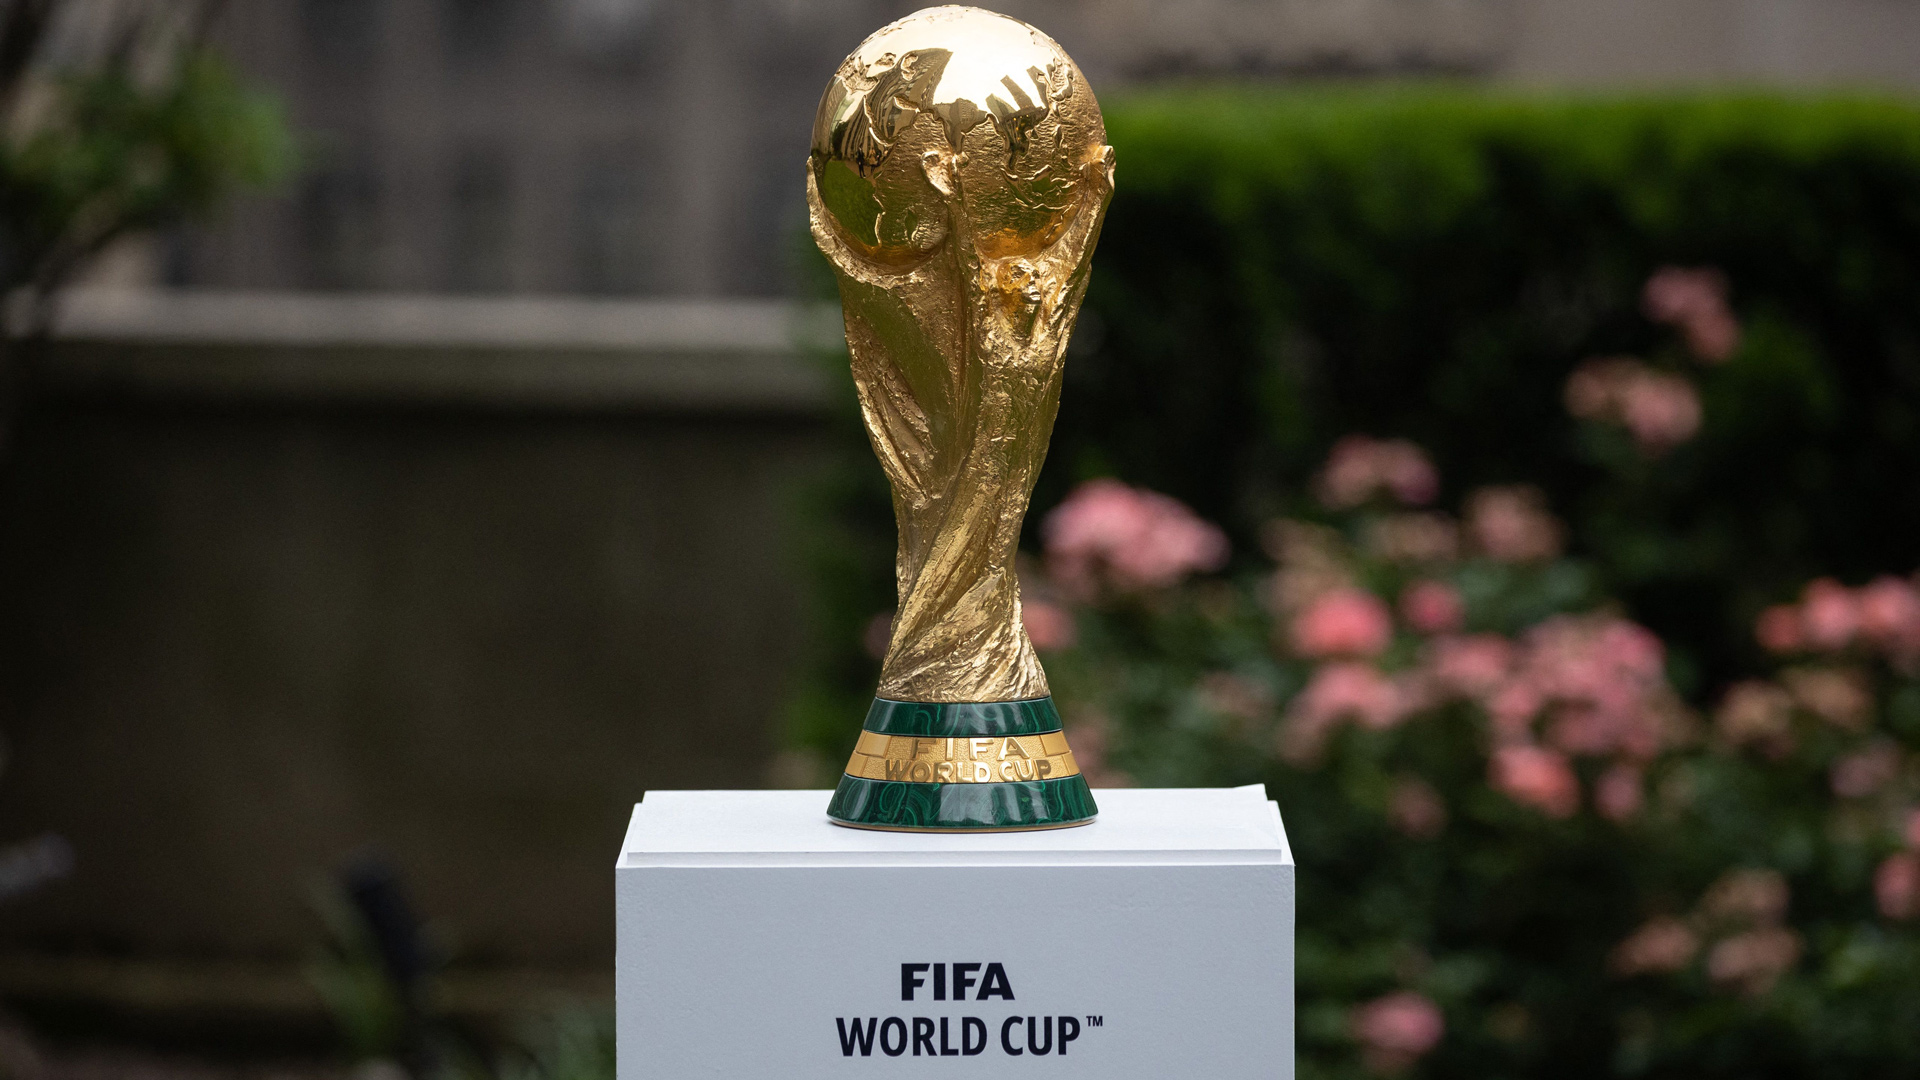 World Cup 2022: FIFA World Cup trophy: History, who designed it